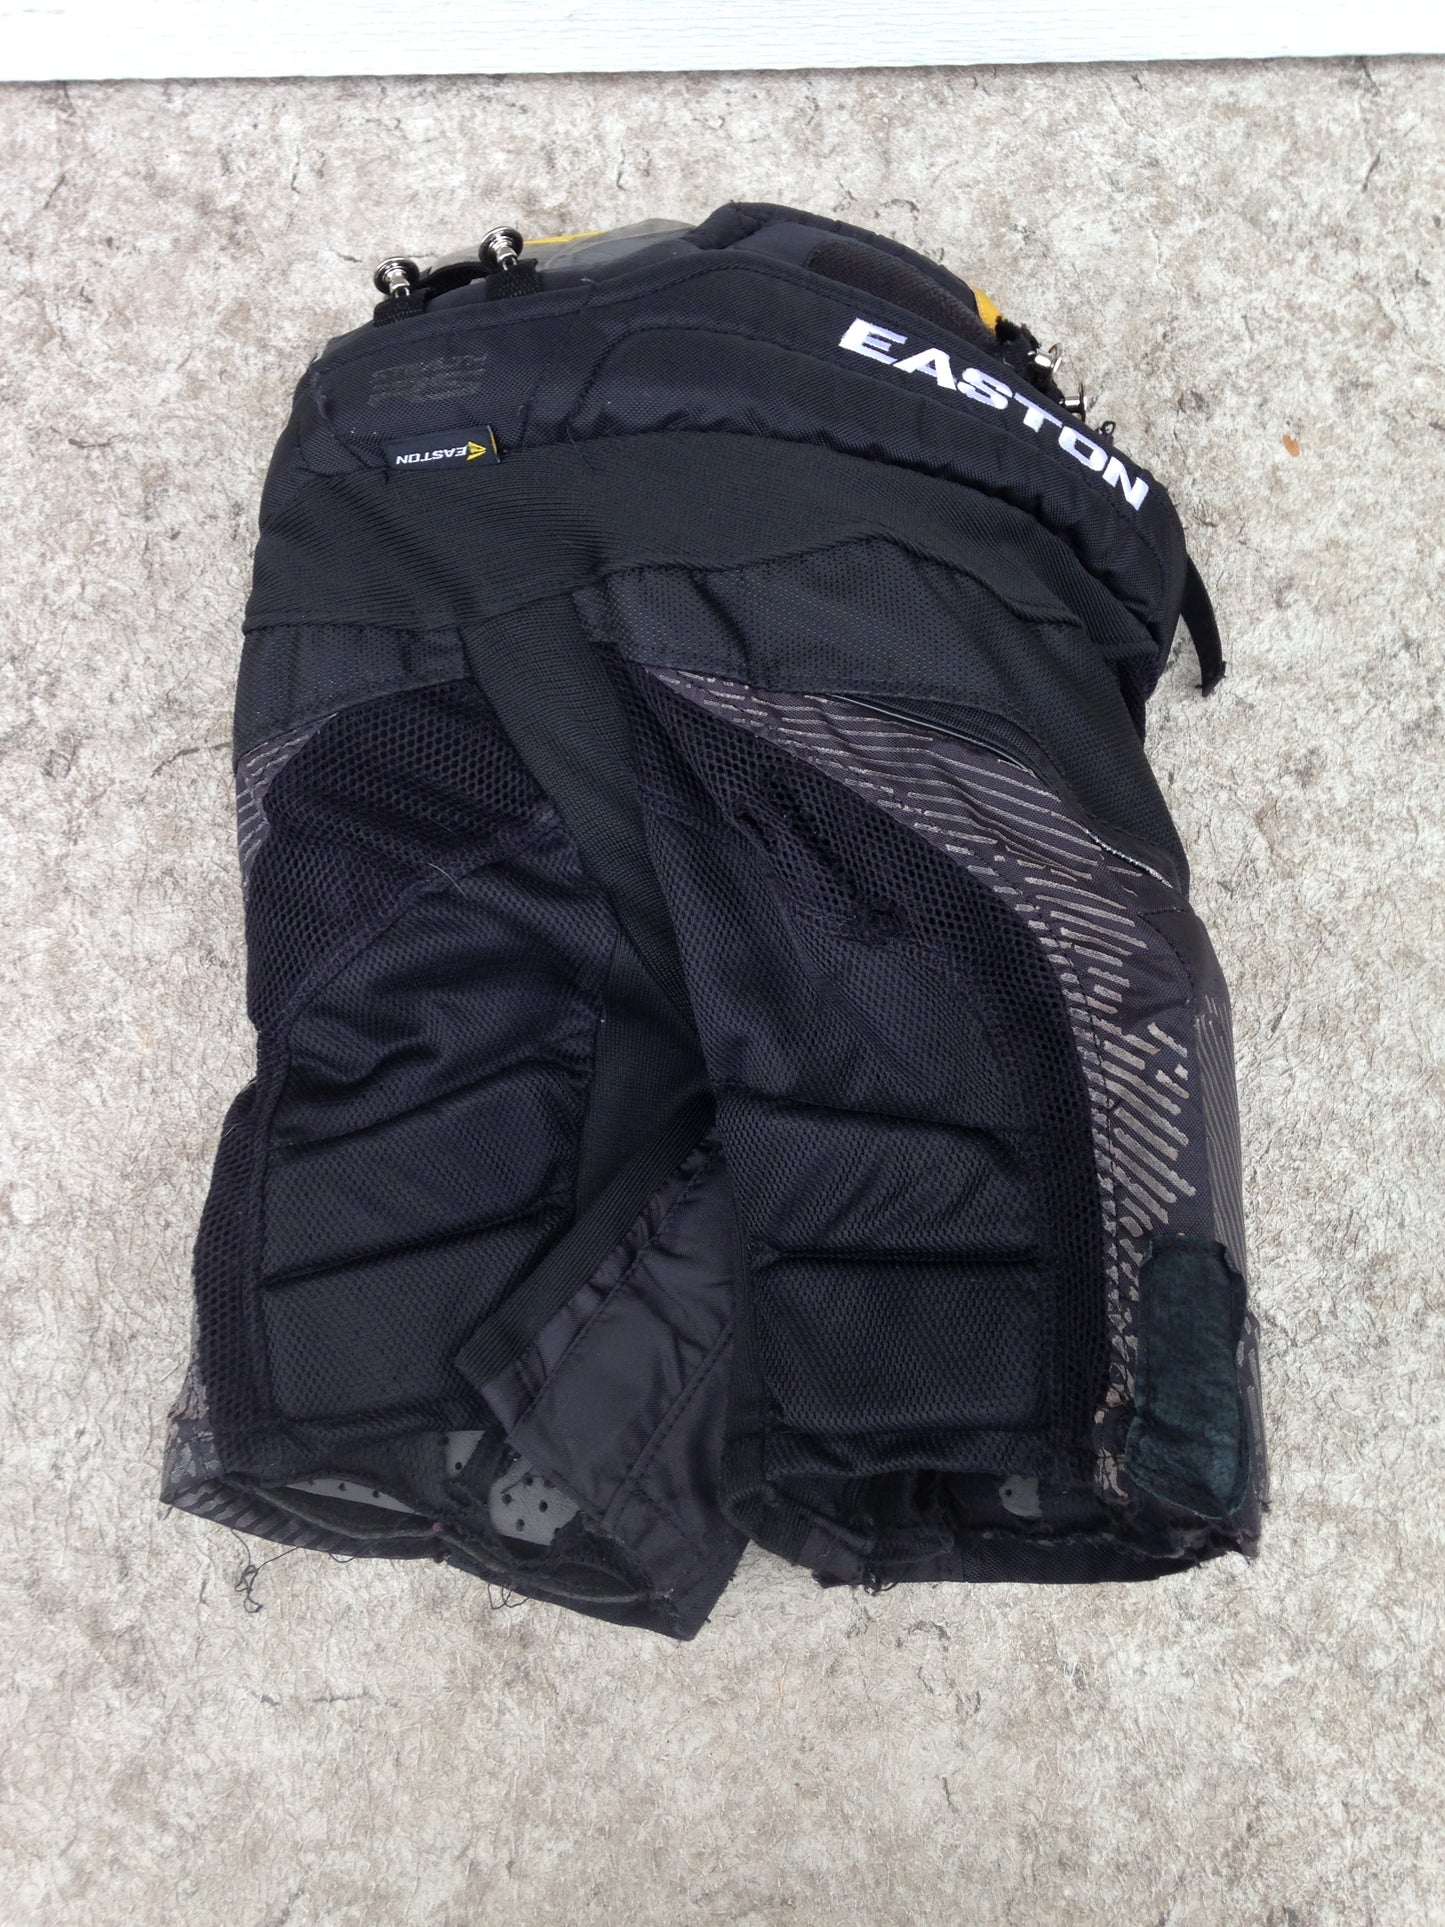 Hockey Pants Child Size Youth X-Large 6-7 Easton Outstanding Quality Has Some Wear